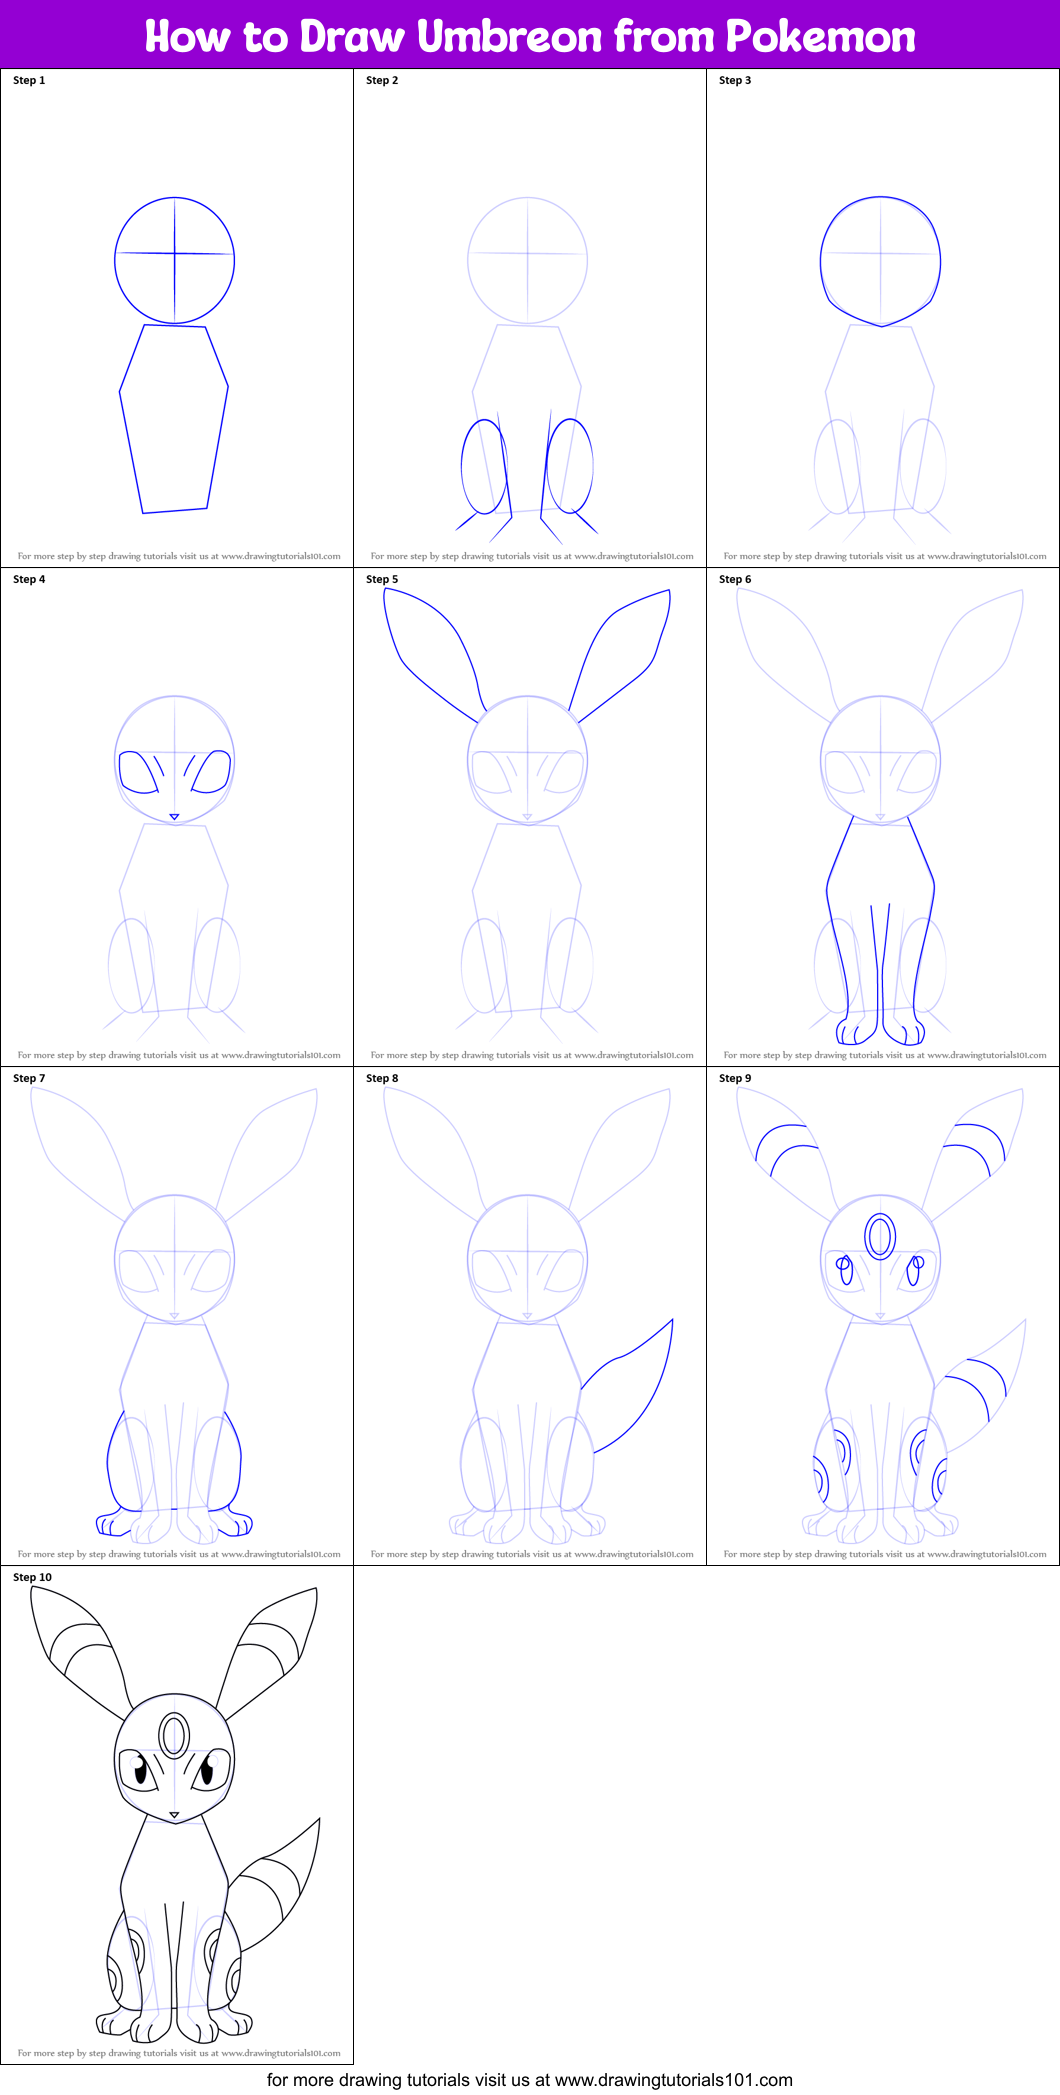 How to Draw Umbreon from Pokemon printable step by step